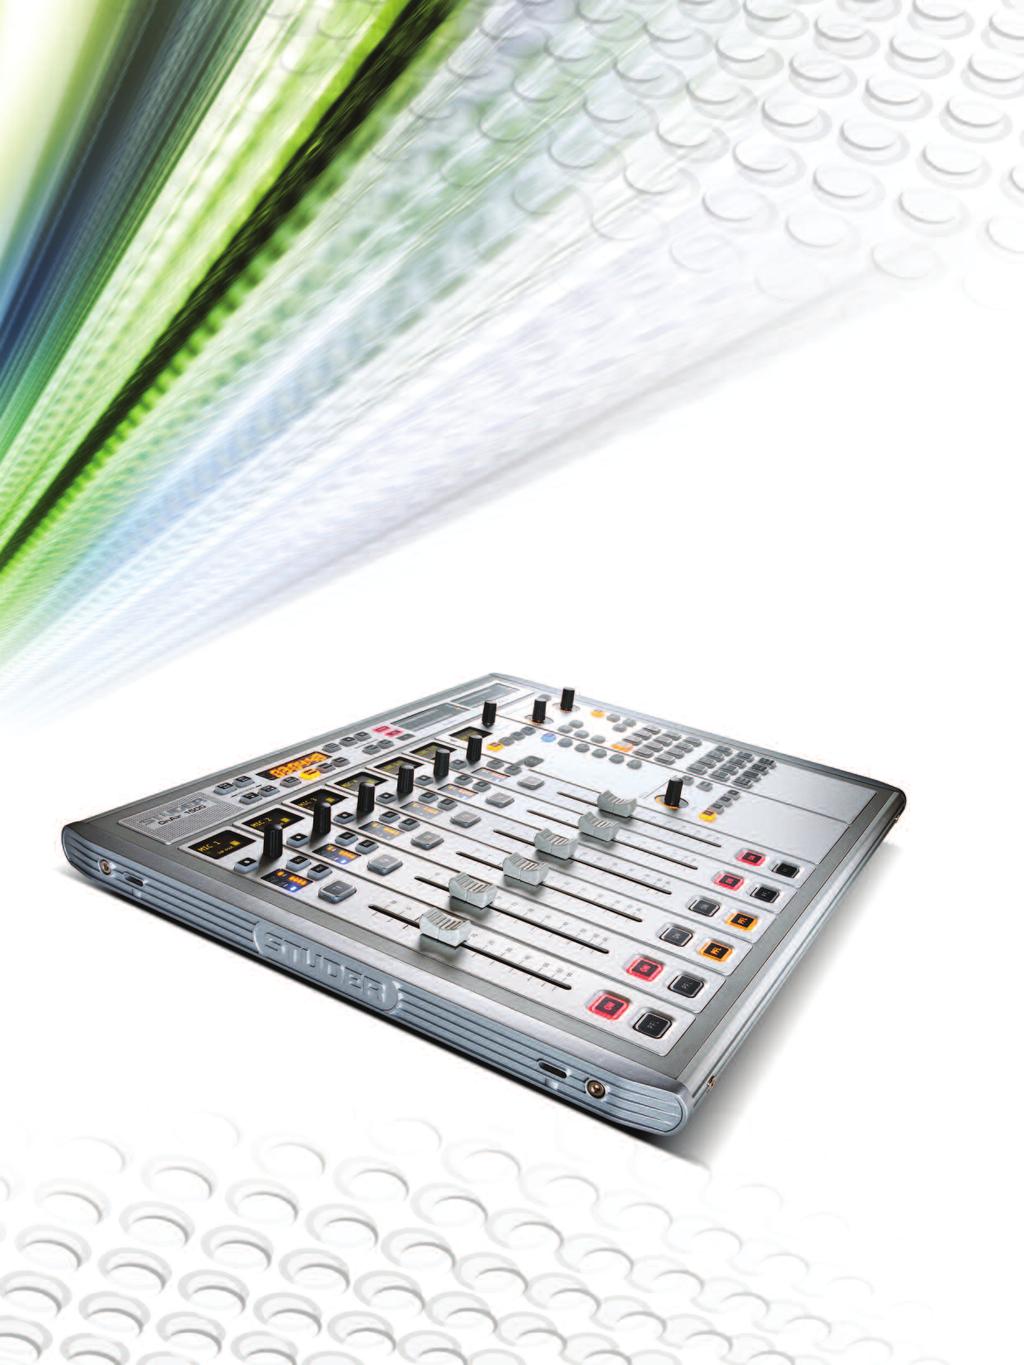 ON-AiR / PRODUCTiON DiGiTAl MixiNG CONSOle